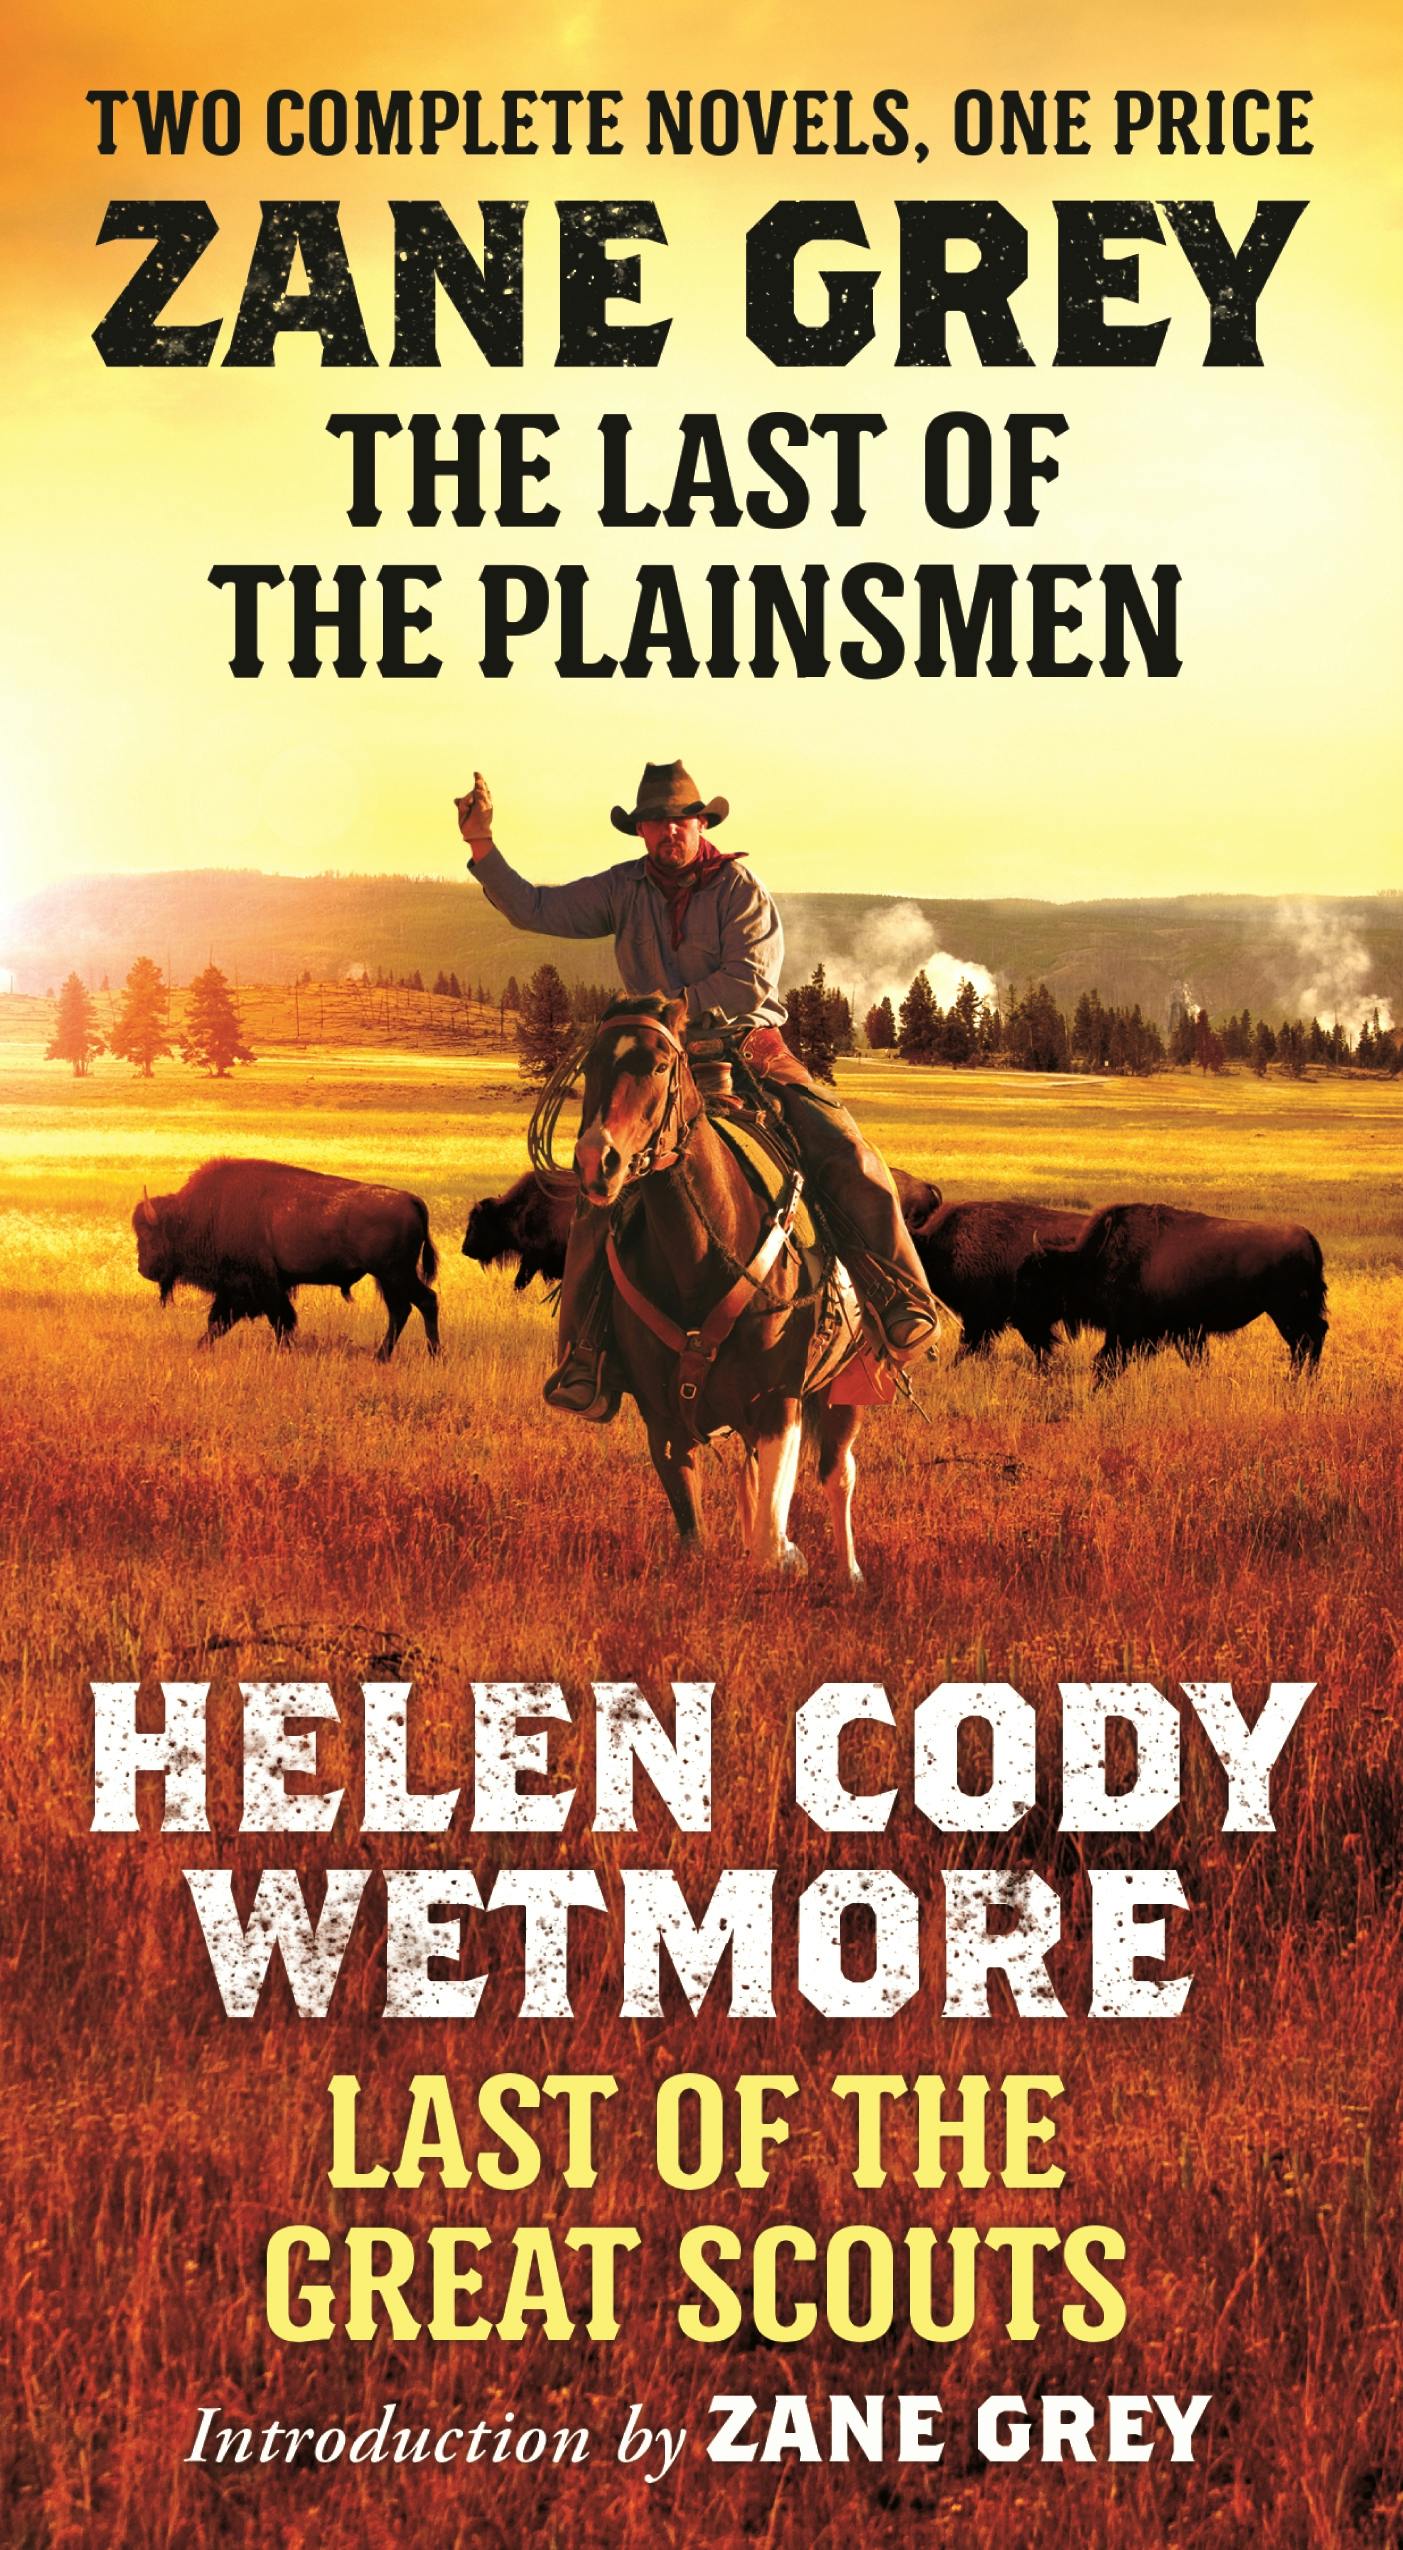 Cover for the book titled as: The Last of the Plainsmen and Last of the Great Scouts